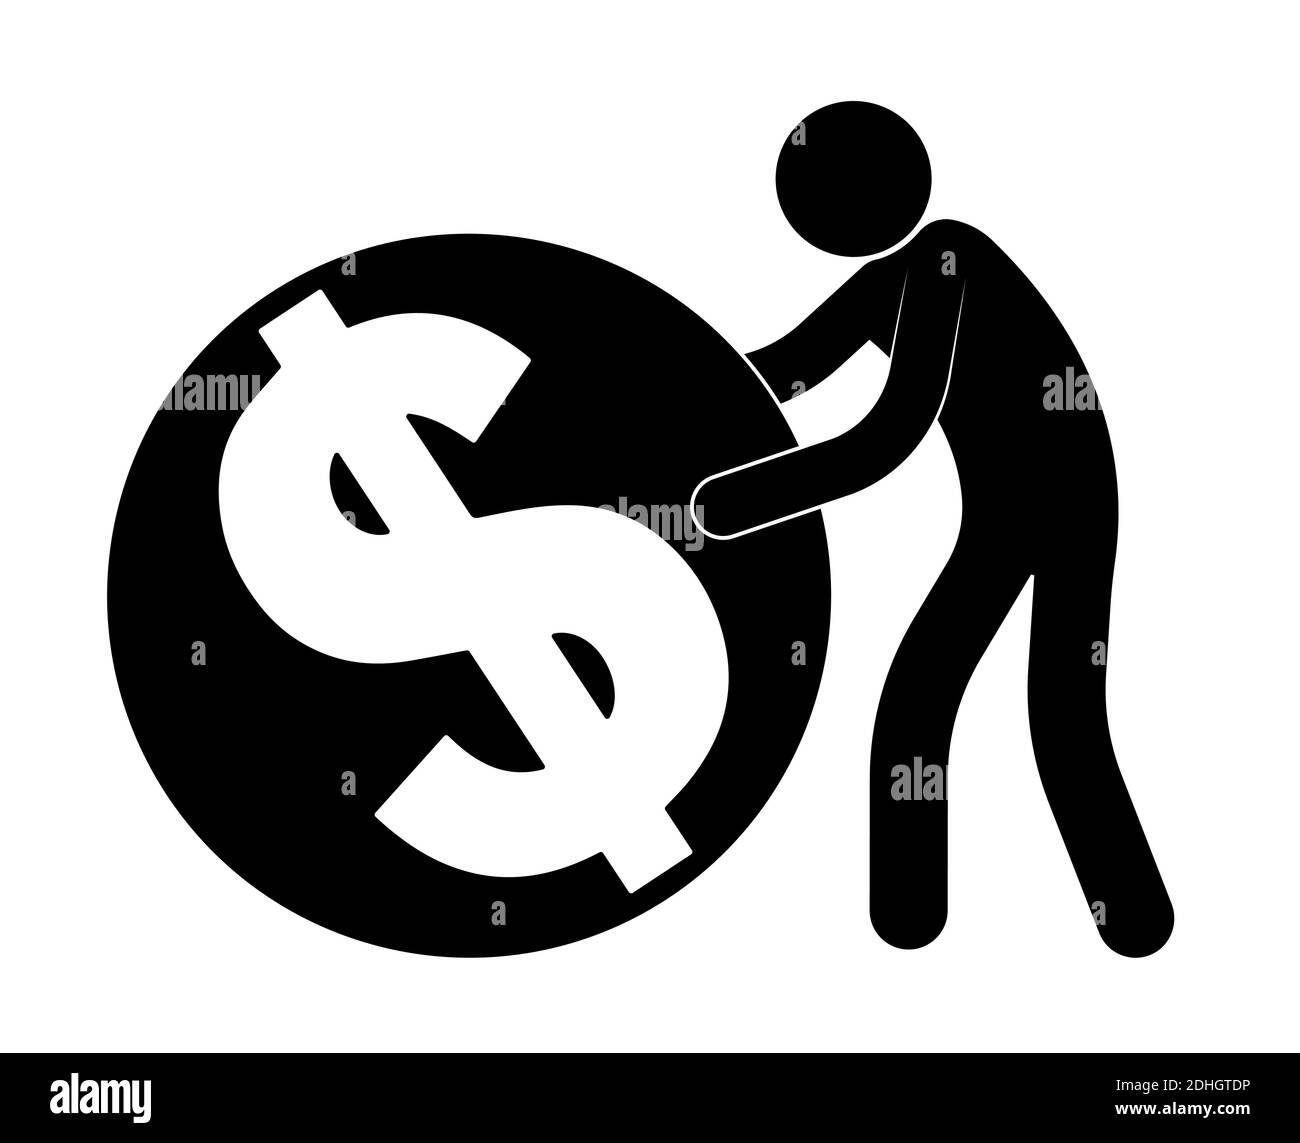 Greed Black and White Stock Photos & Images - Alamy